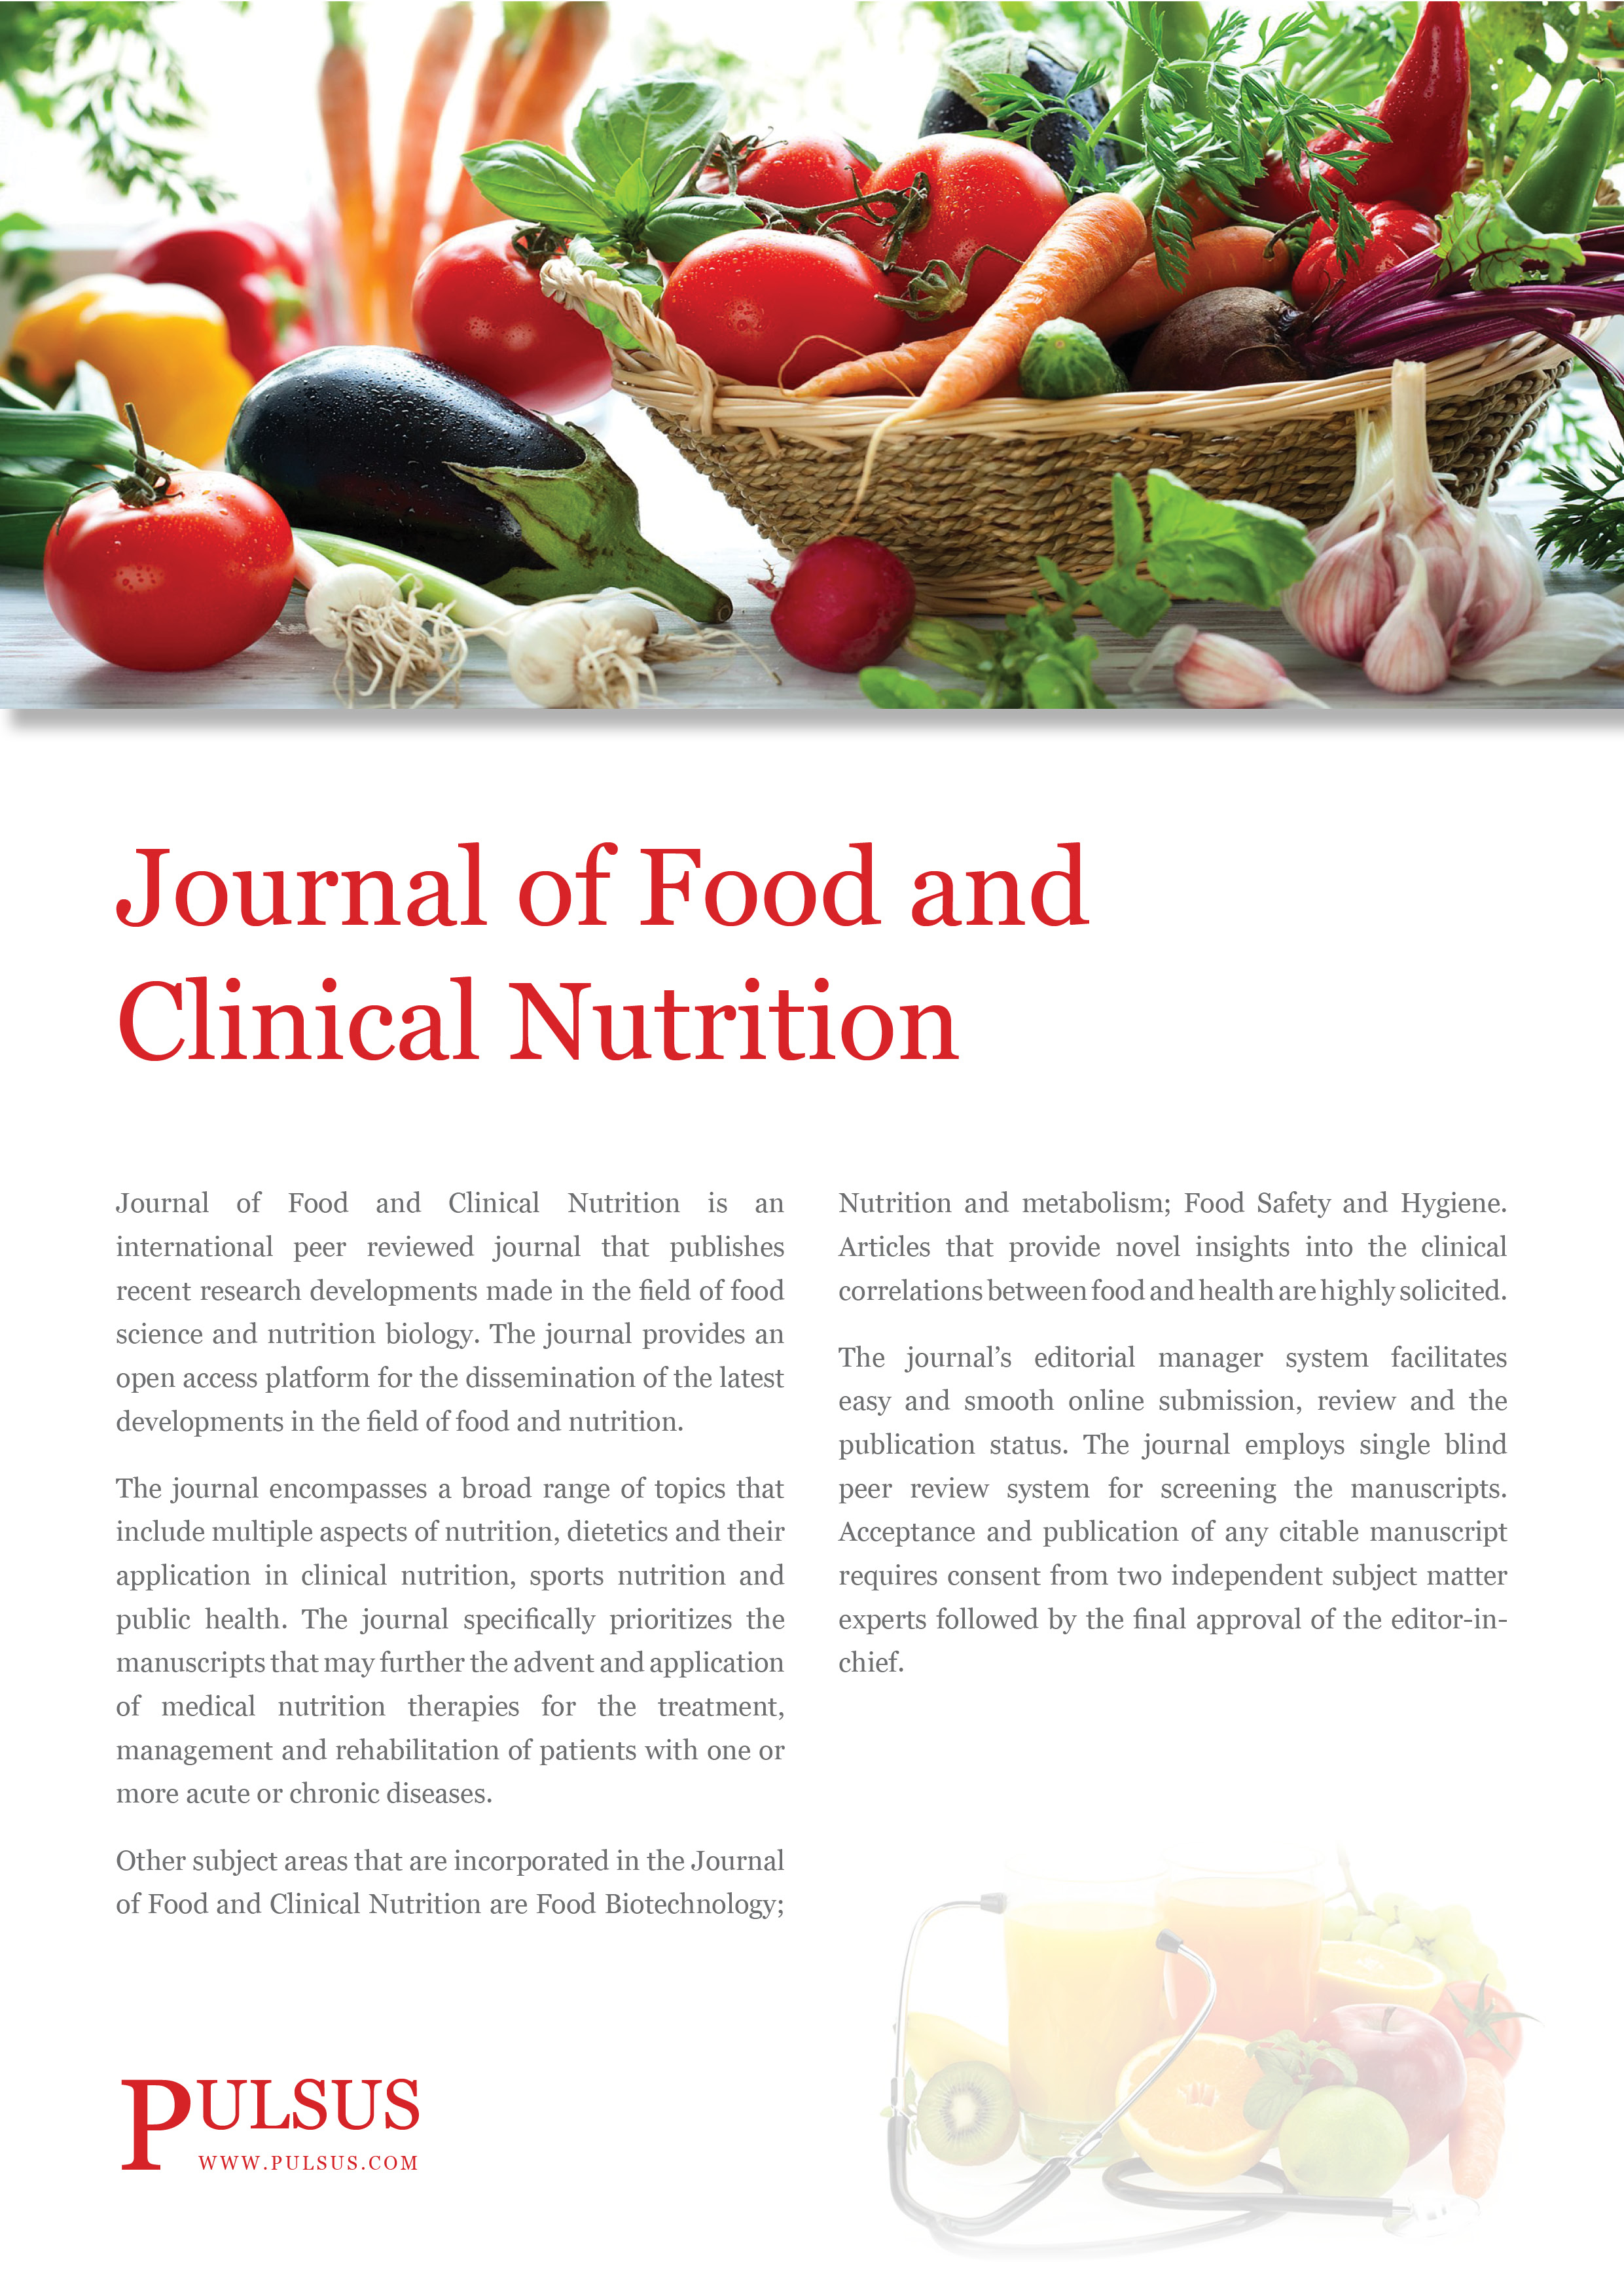 clinical research and studies journal